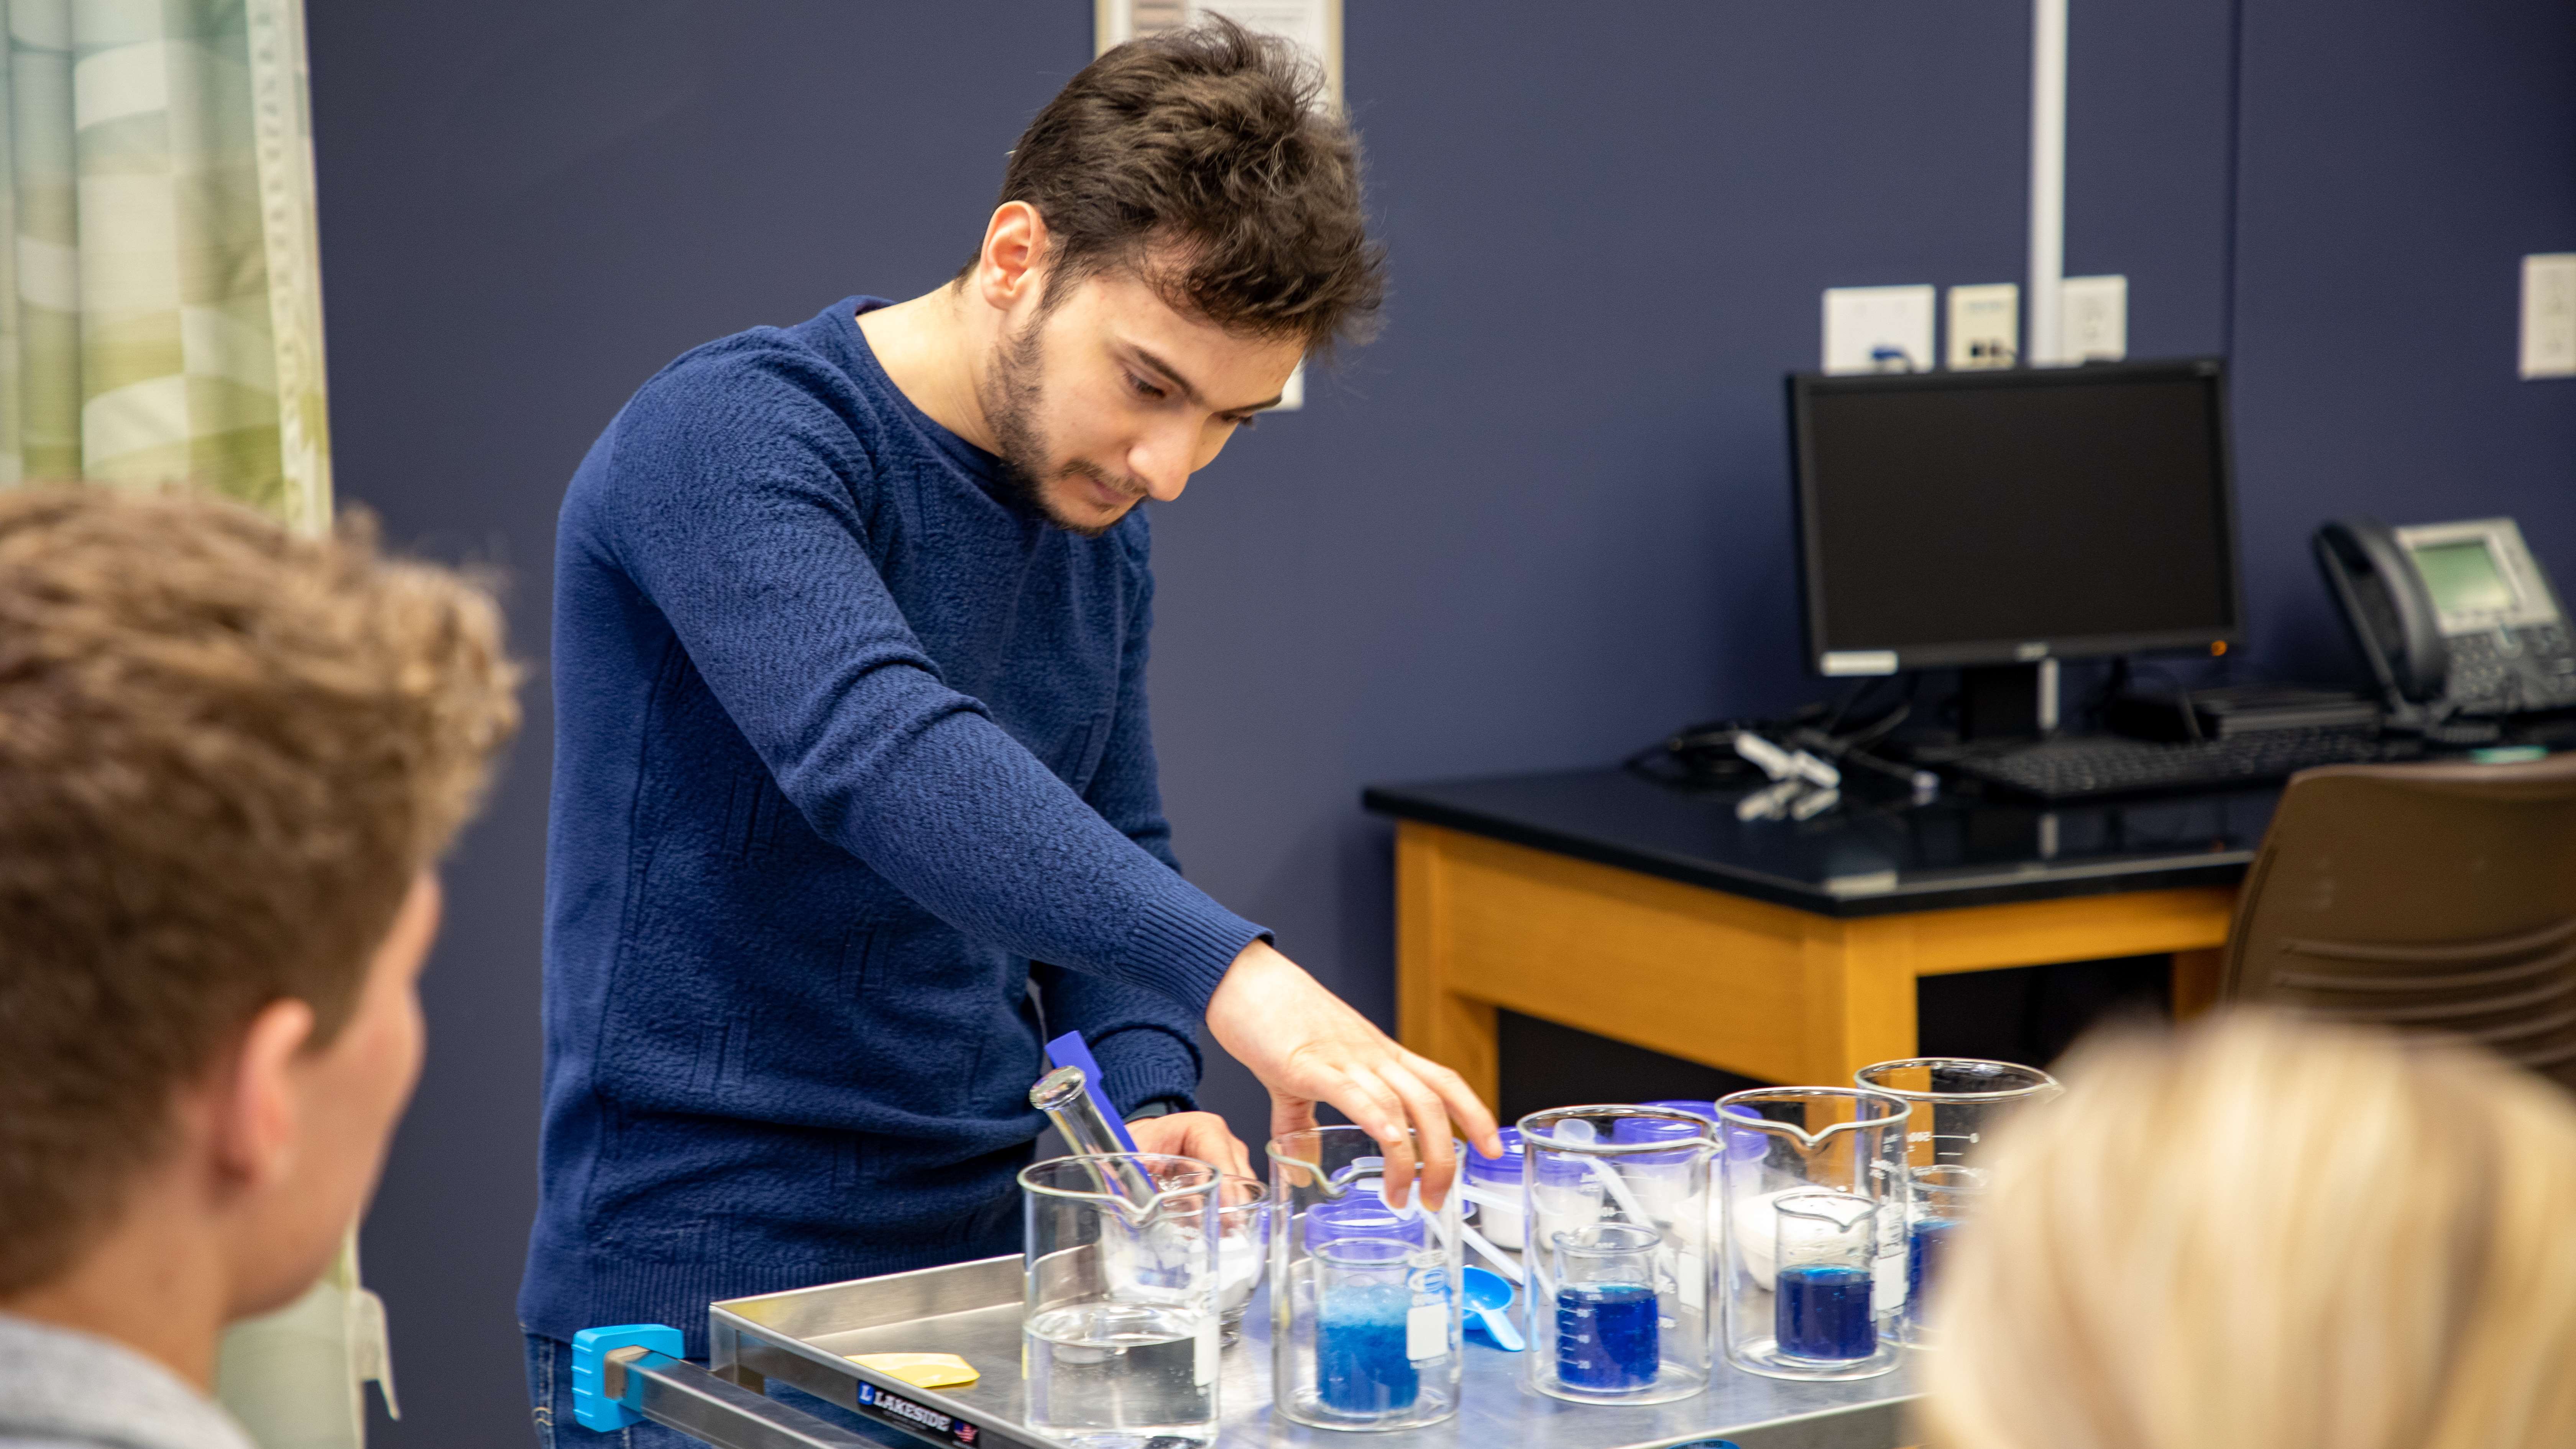 Male student experiments with beakers filled with blue liquid.